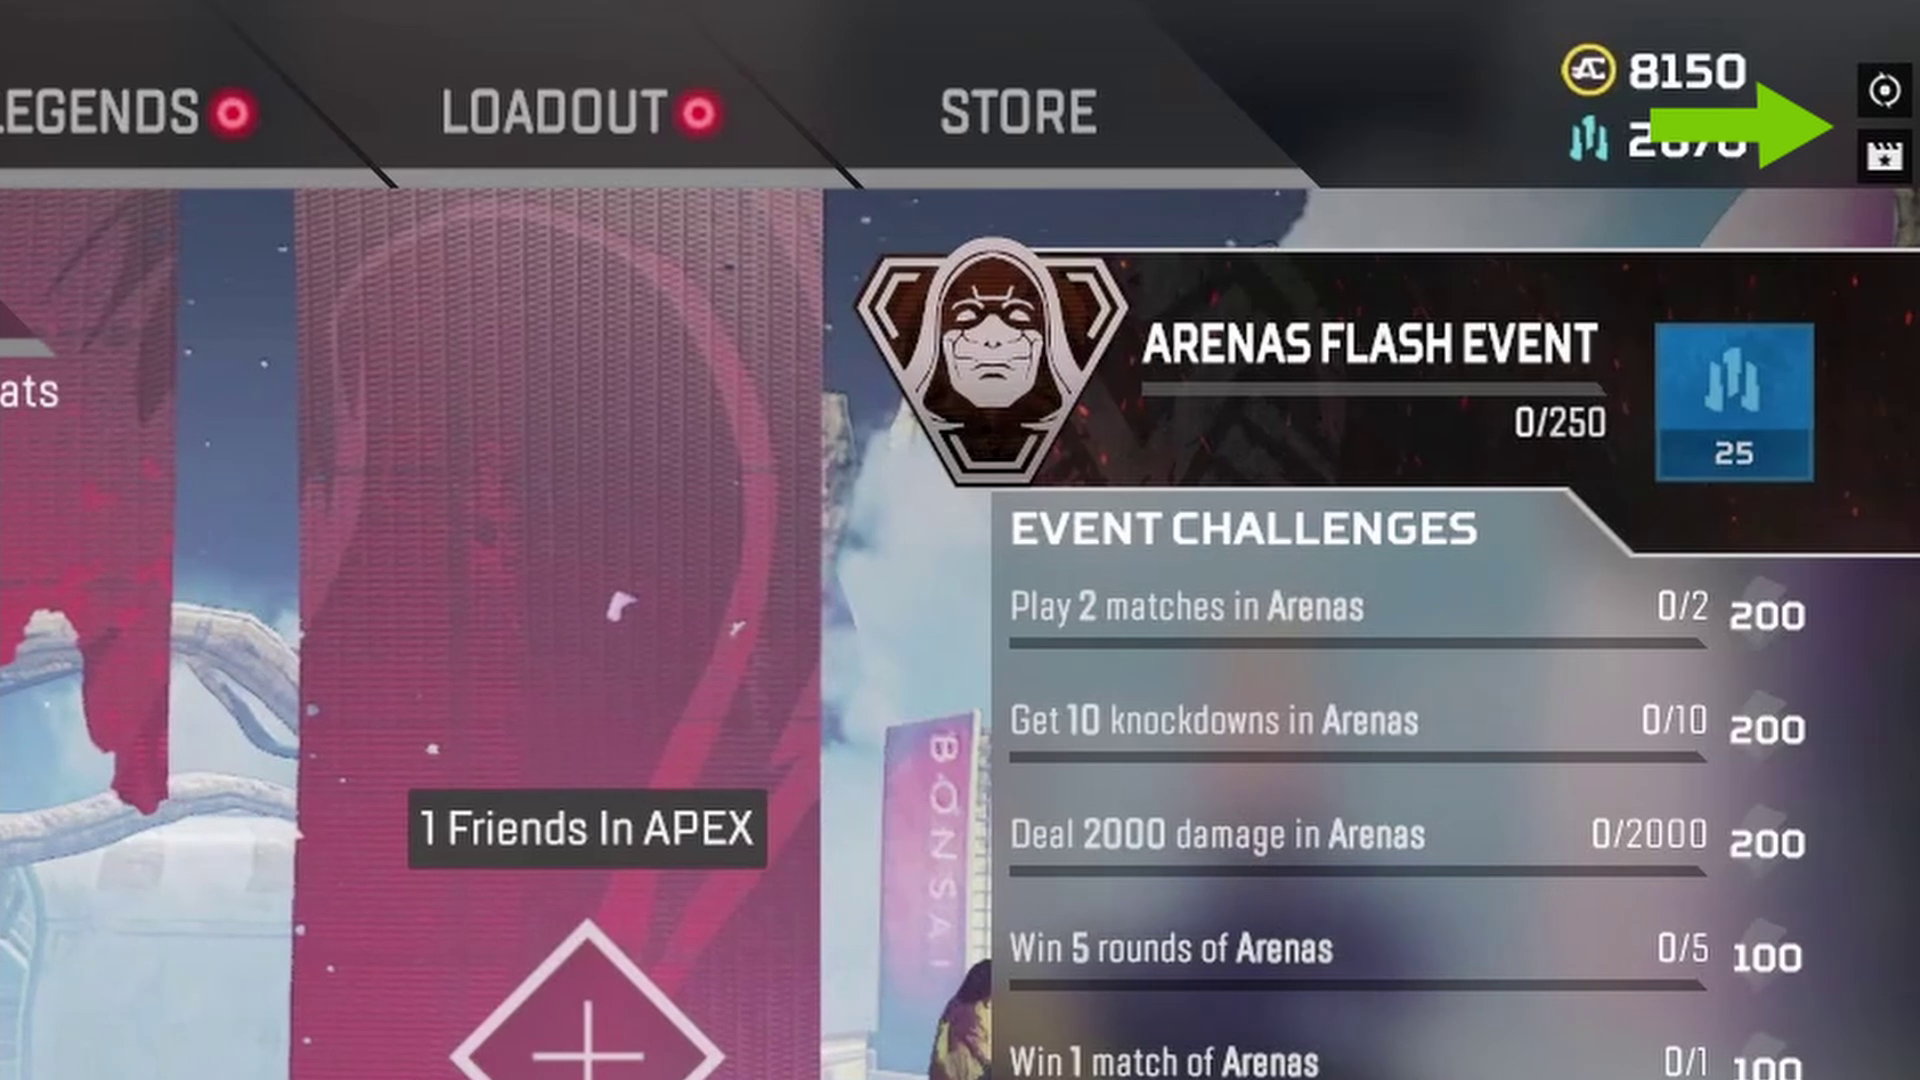 Gfn Thursday Share Apex Legends Highlights In New Event Nvidia Blog